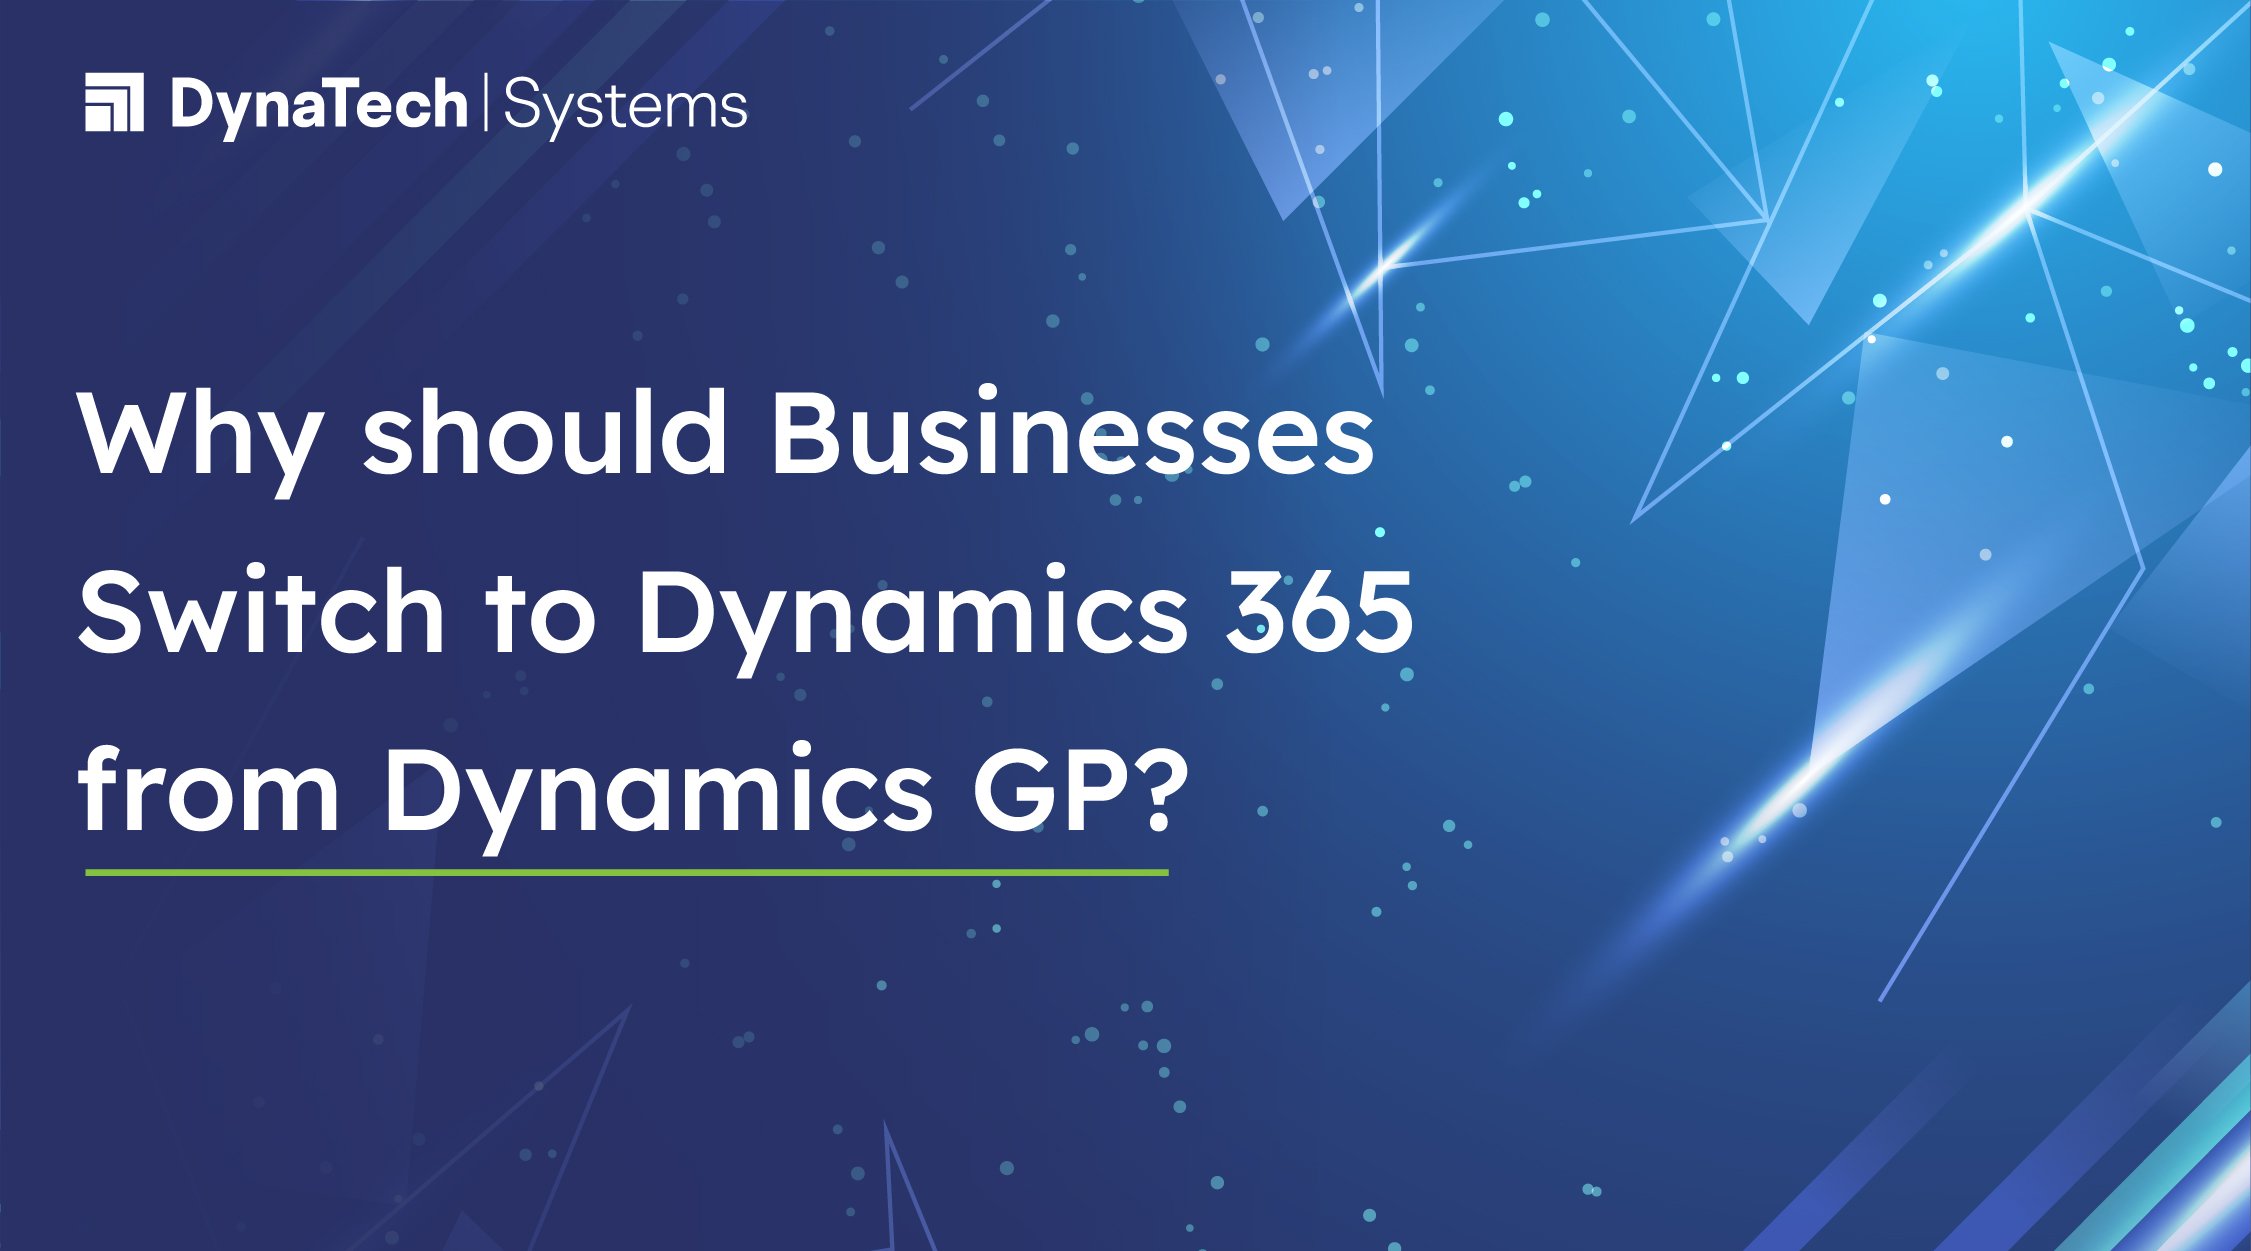 Why Should Businesses Switch to Microsoft Dynamics 365 from Microsoft Dynamics GP?